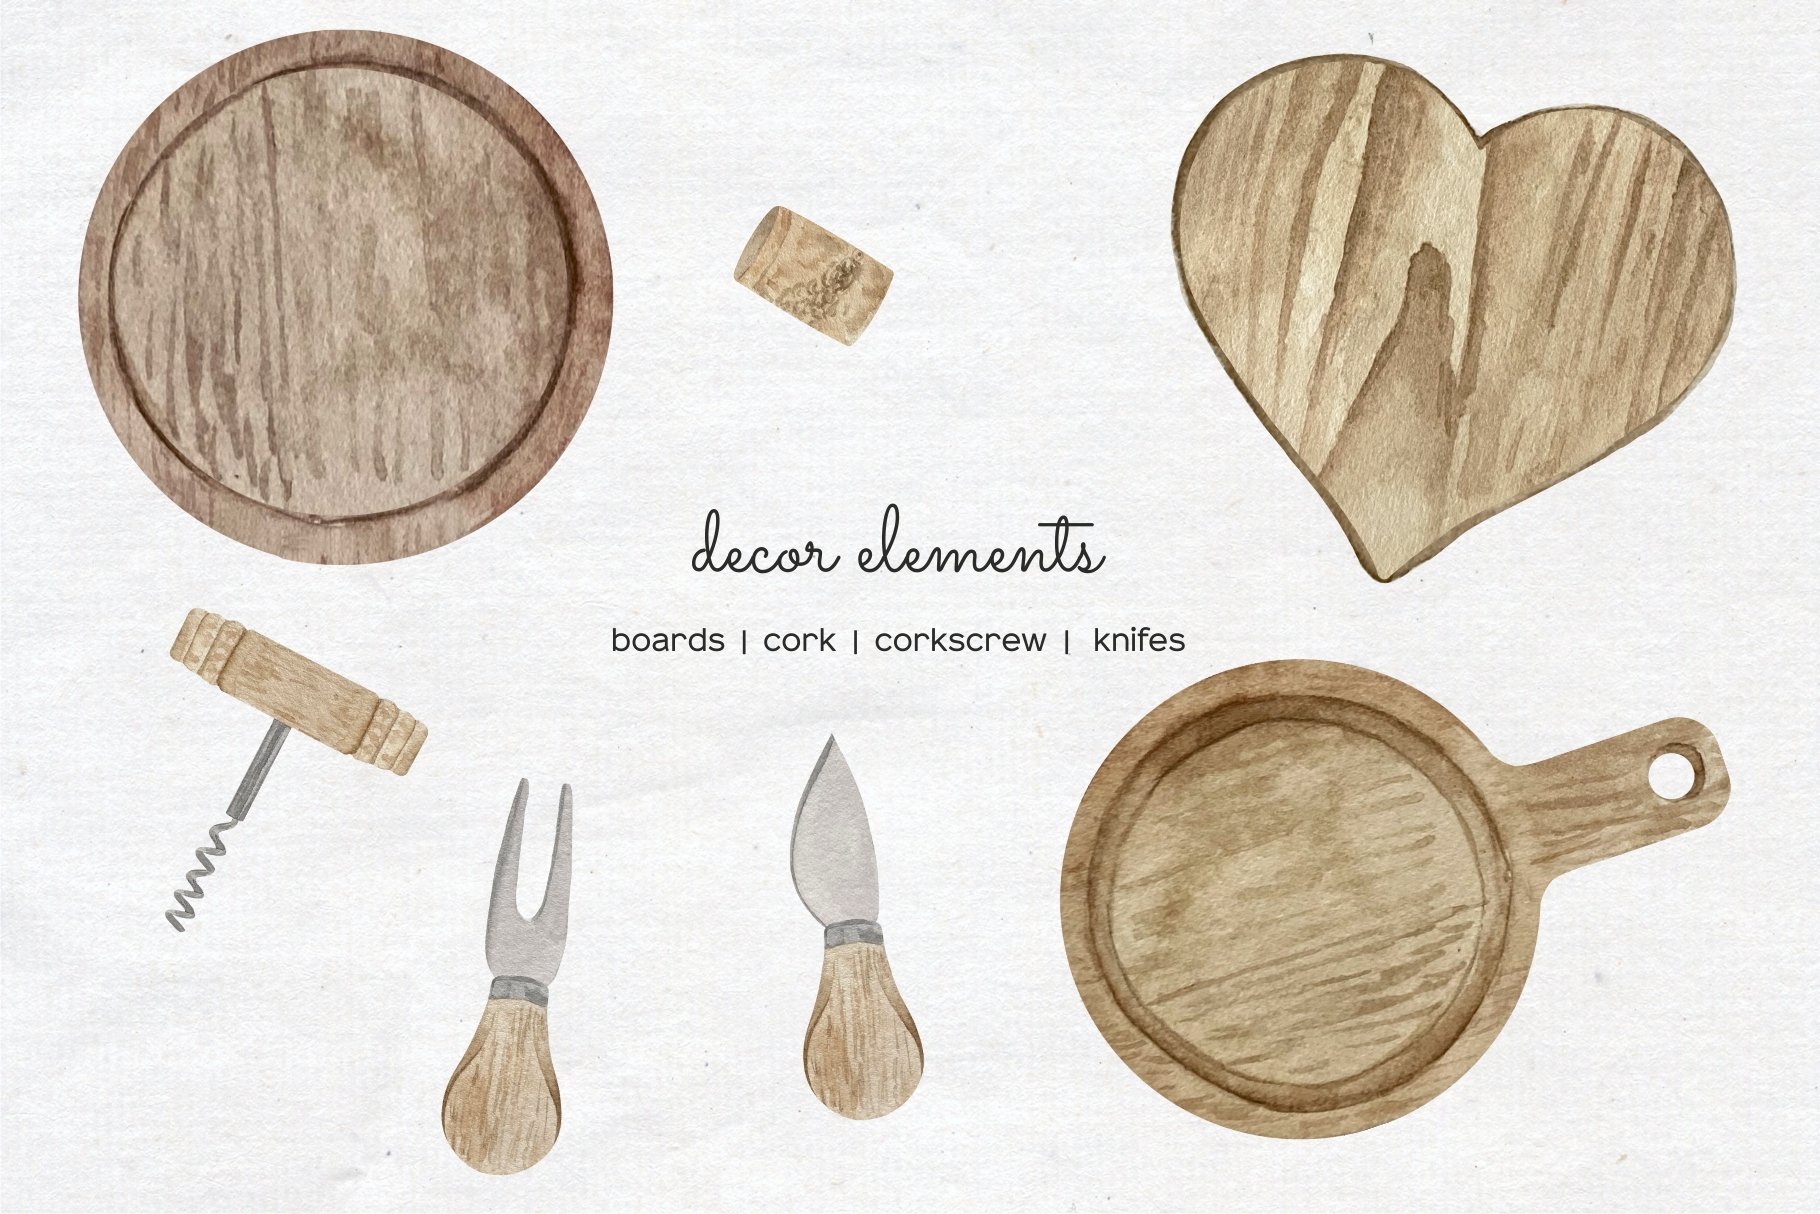 Wonderful images of wooden boards and cheese knives.